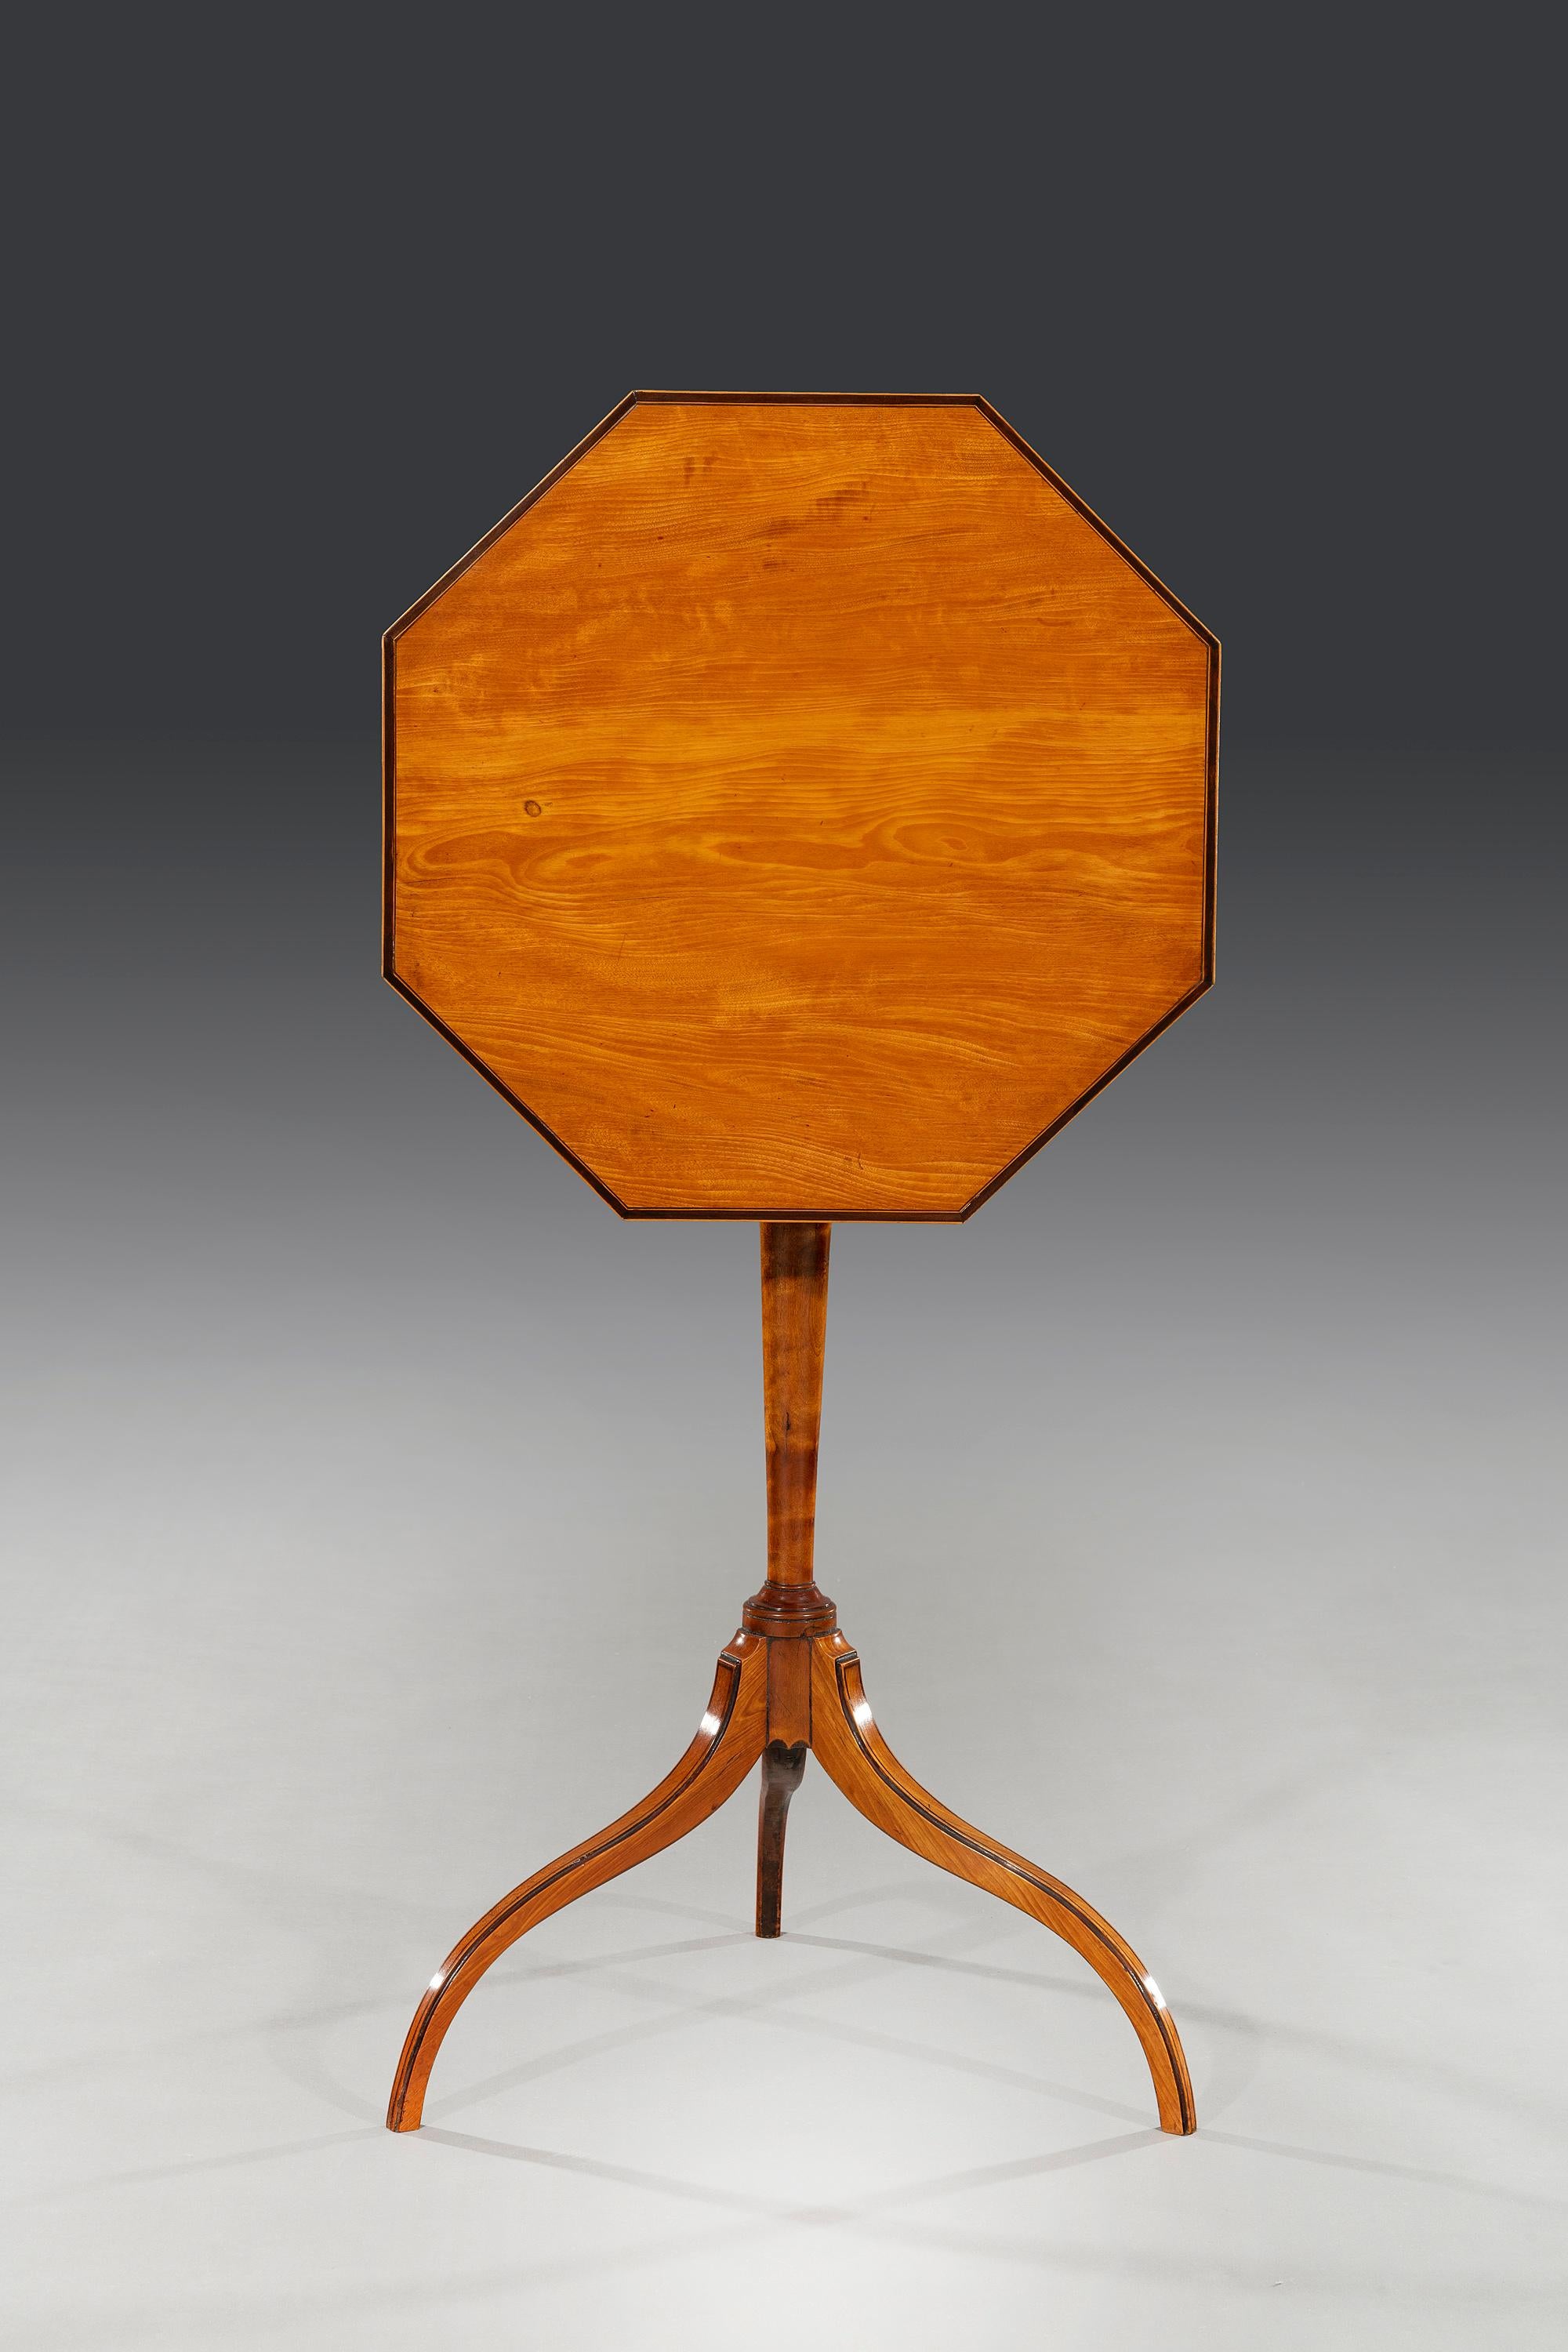 The octagonal tilt-top table has purple-heart cross banding and is veneered in figured West Indian satinwood and made through-out in solid satinwood. The table stands on a tripod base with elegant turned pedestal column and down-swept inlaid tapered